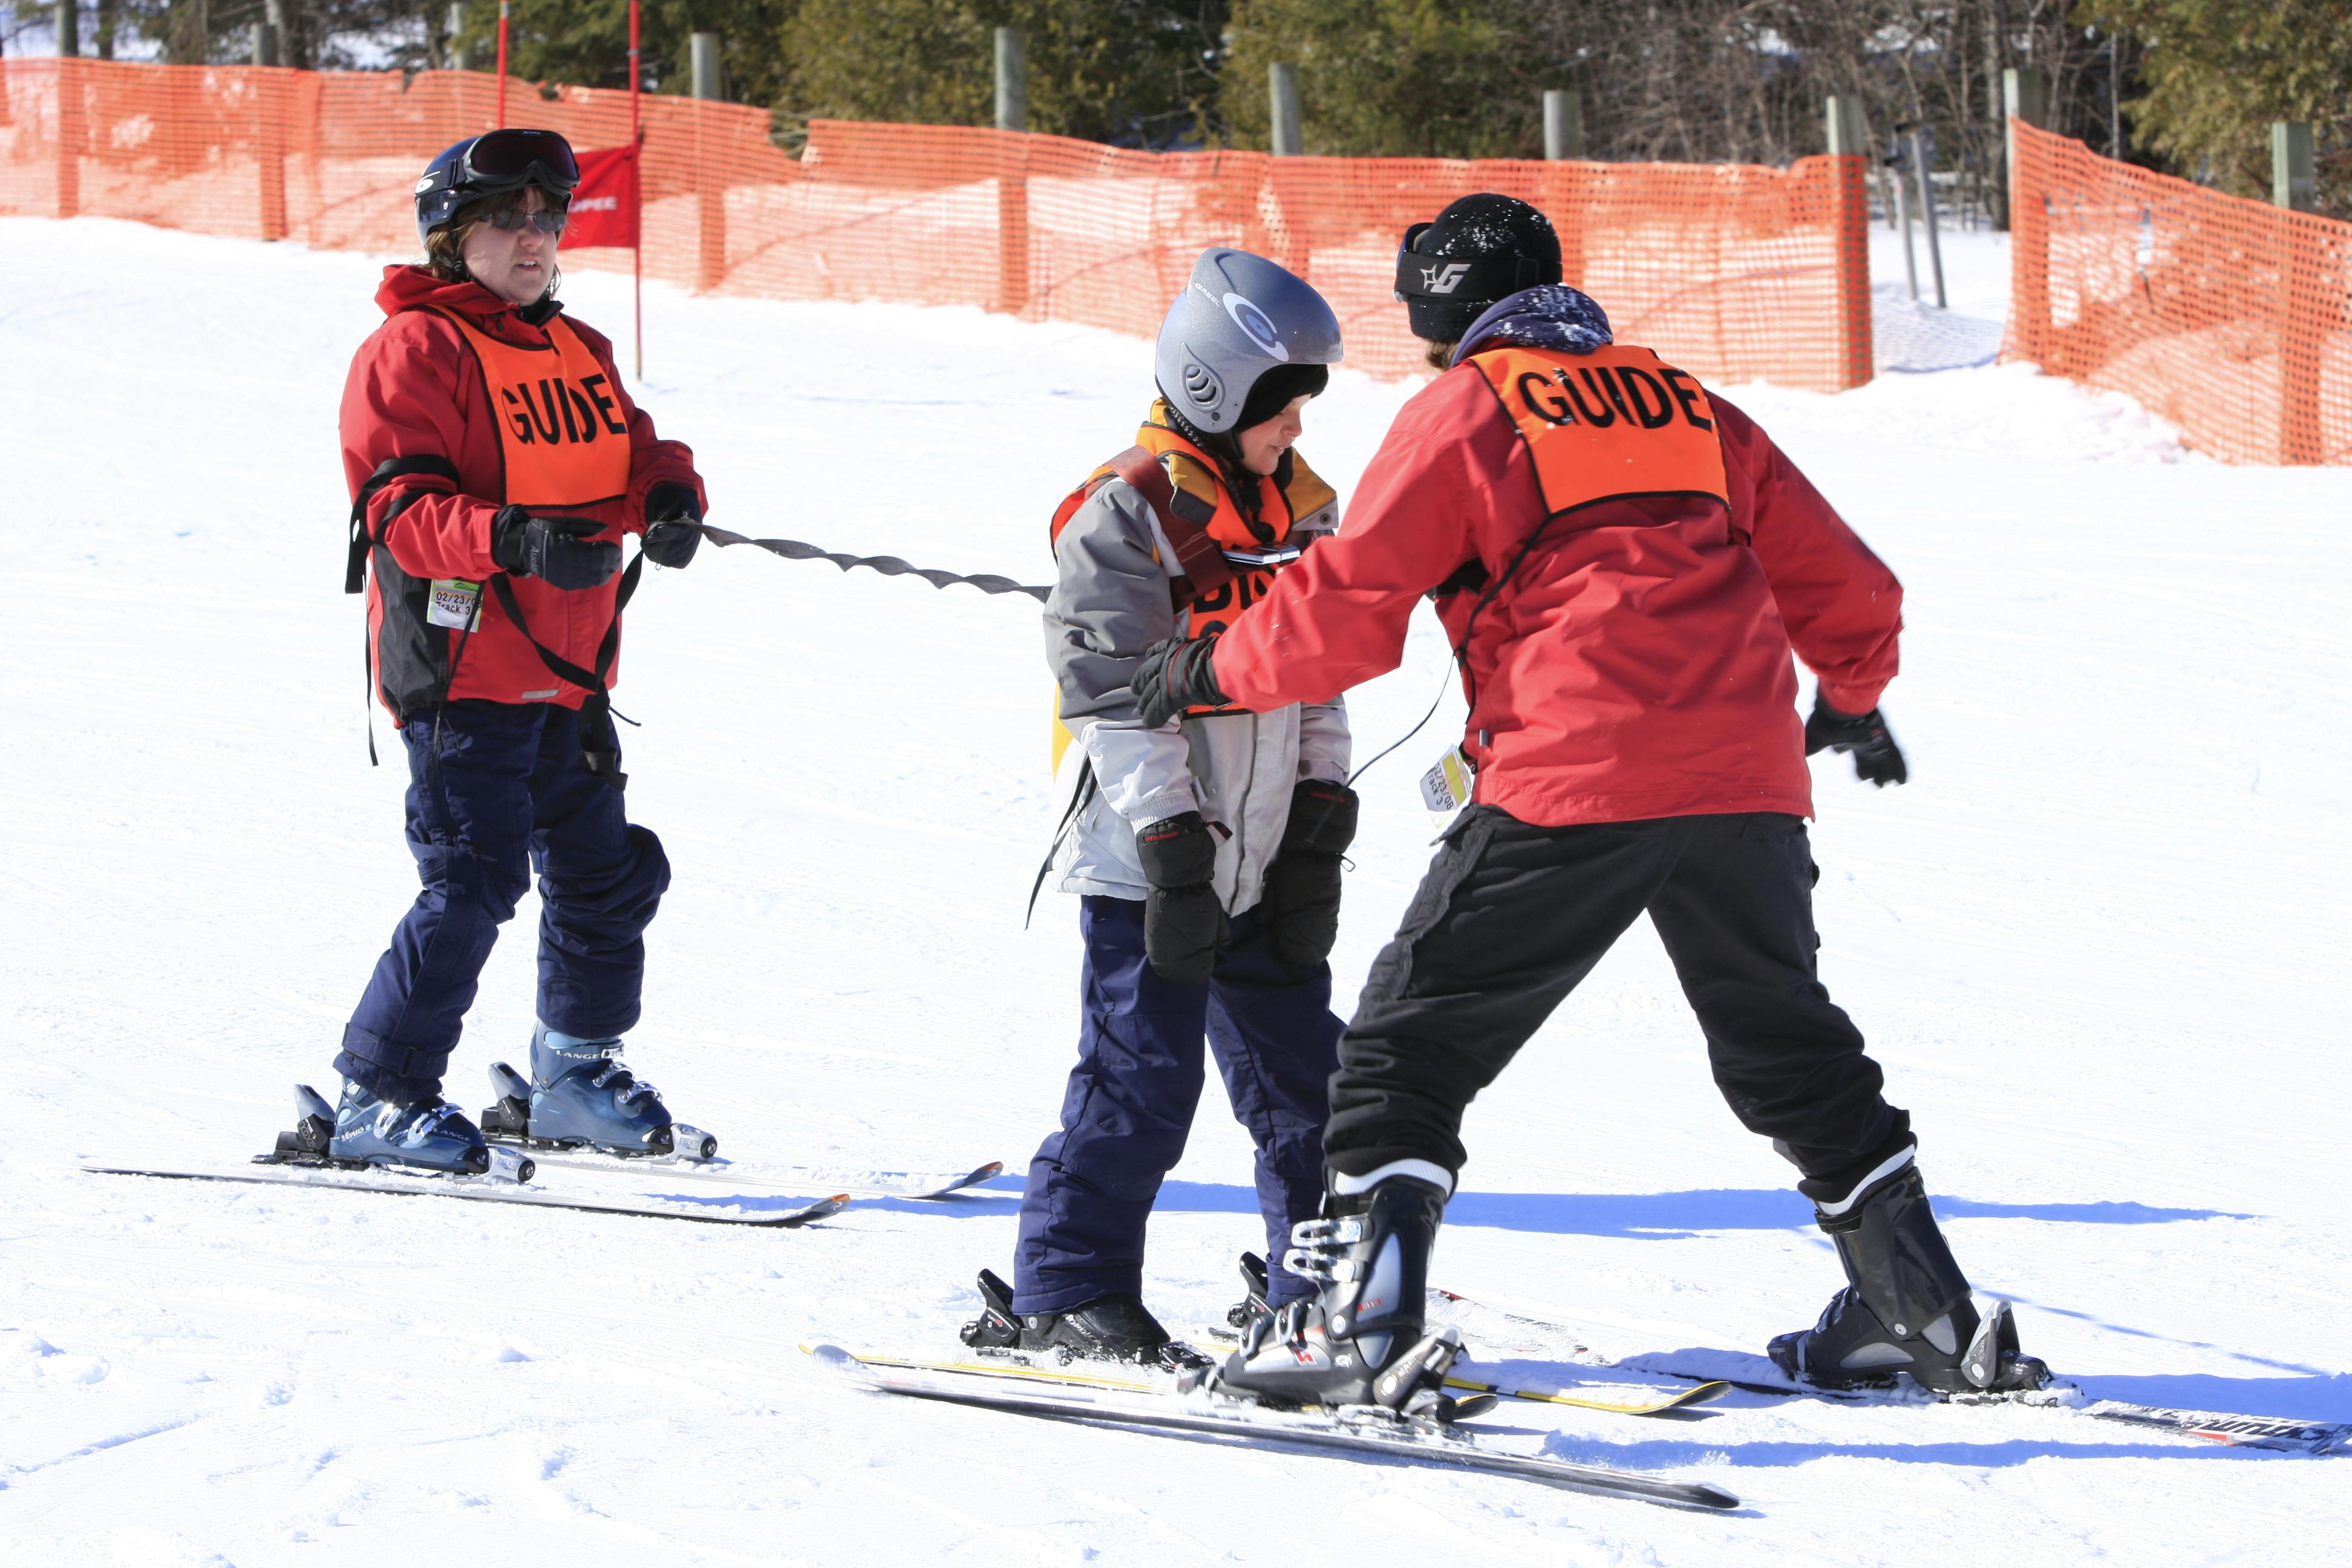 Track-3 student in a harness and tether with 2 guides assisting them. All 3 people are in skis. 